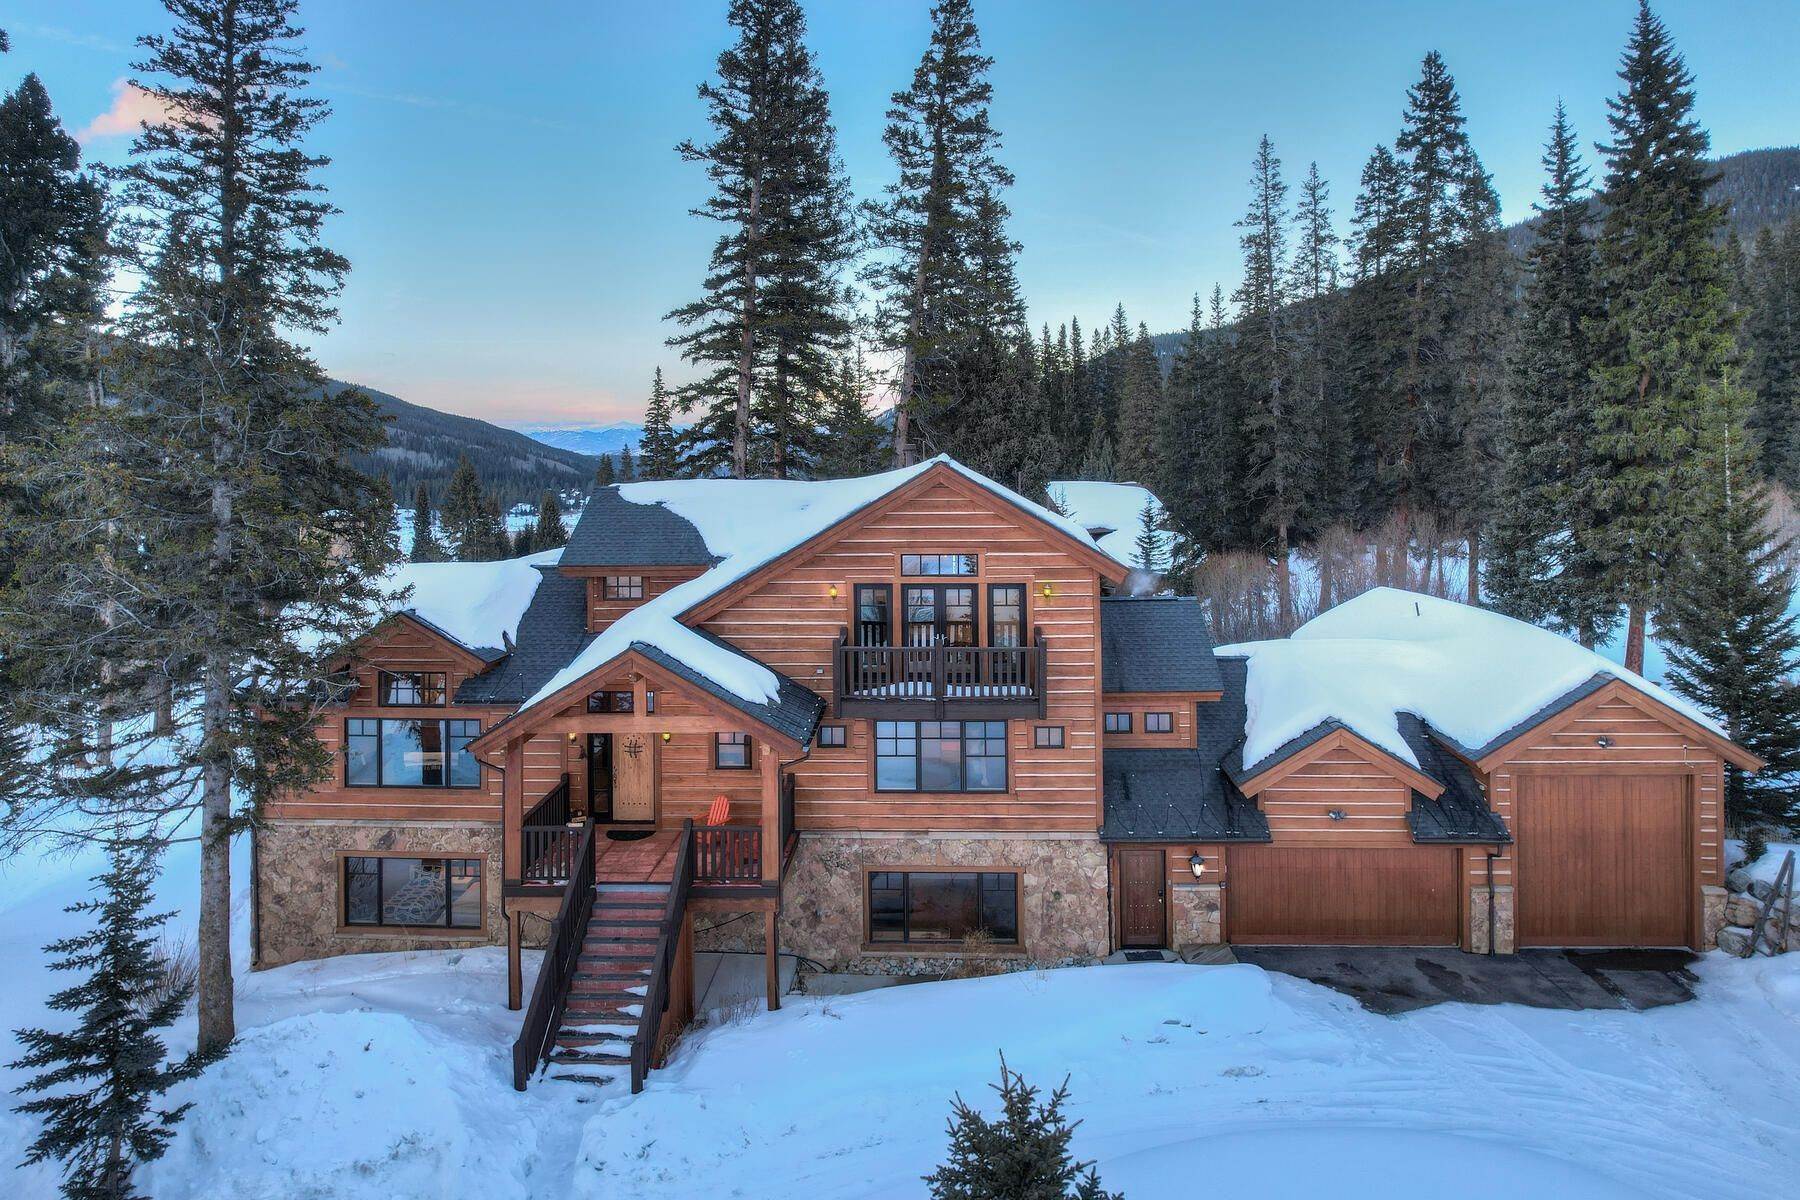 Single Family Homes for Active at 397 Whispering Pines Circle, Breckenridge, CO, 80424 397 Whispering Pines Circle Breckenridge, Colorado 80424 United States